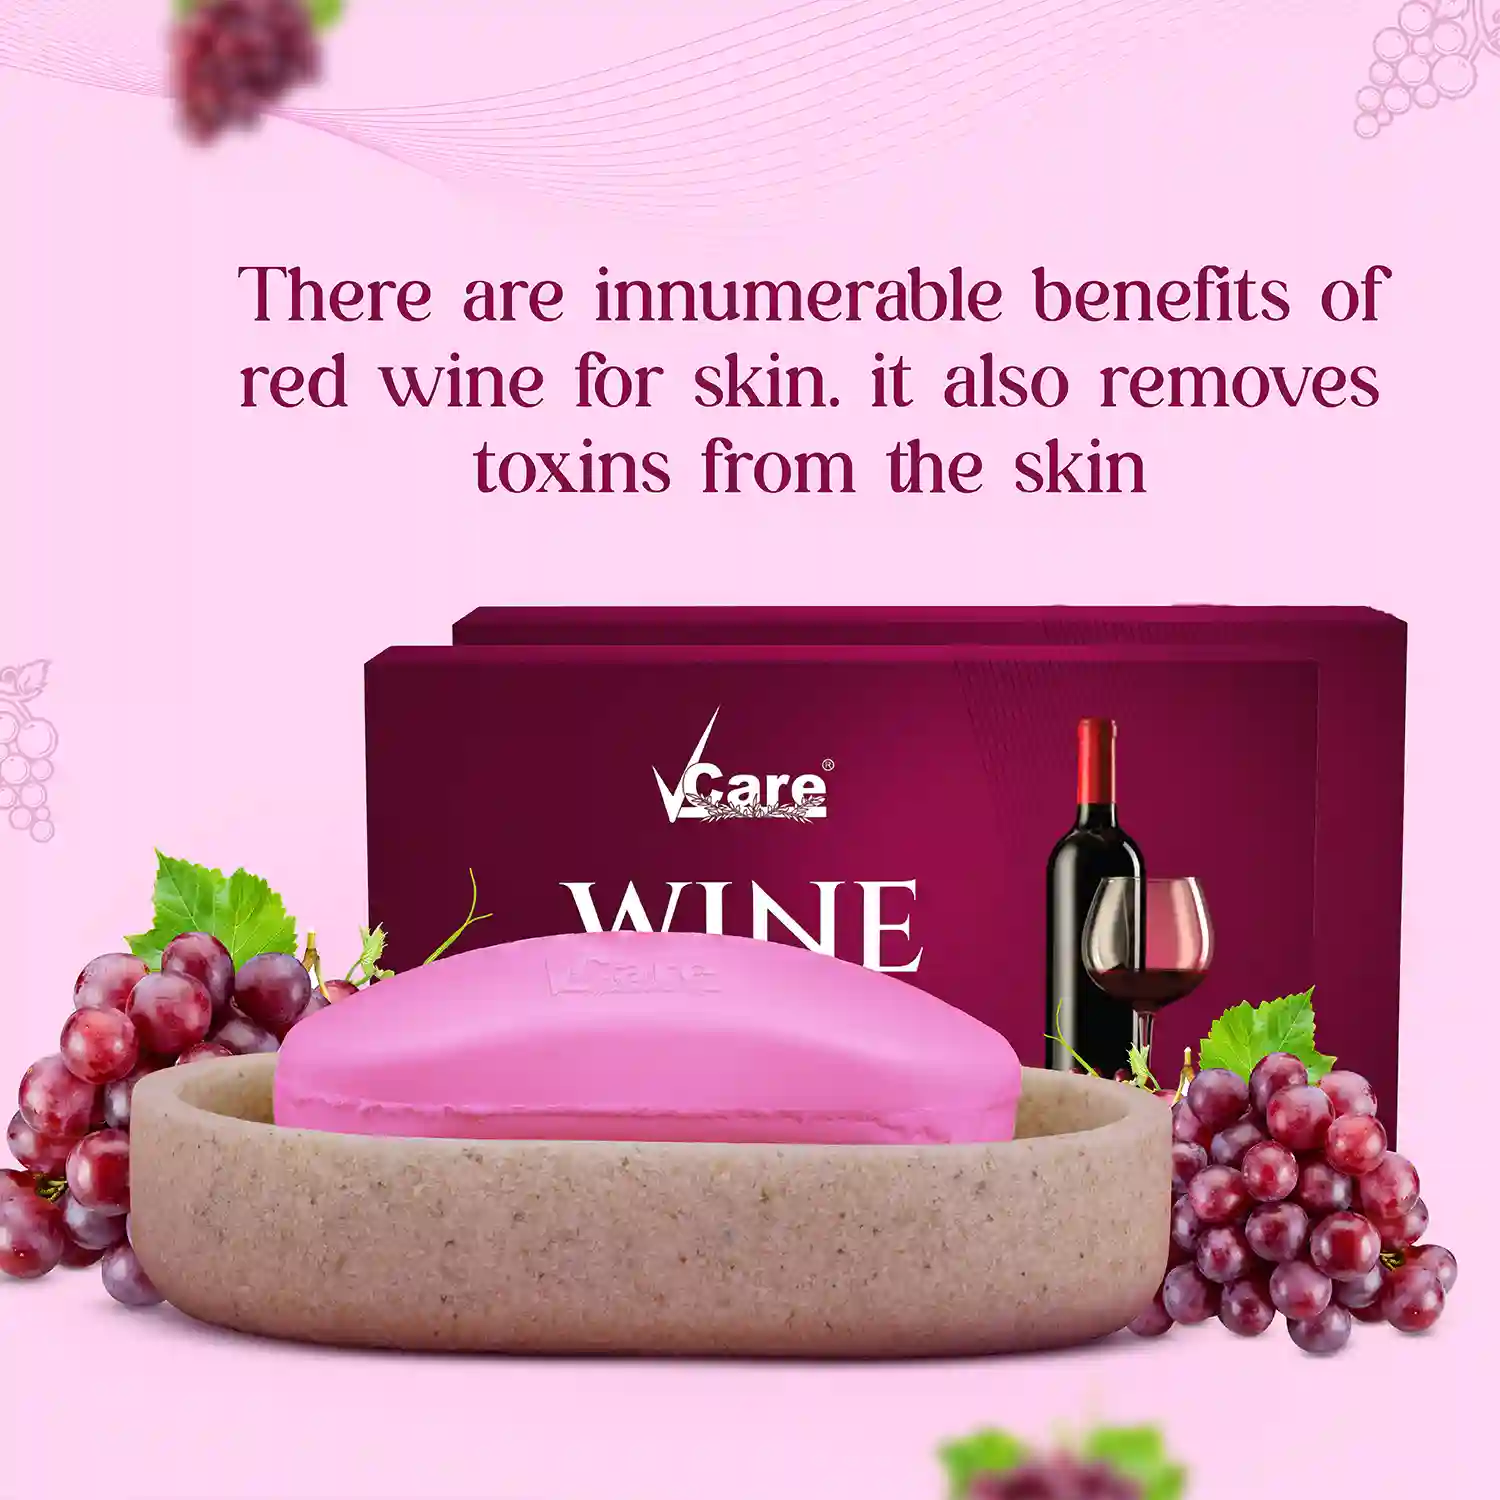 red wine soap for women